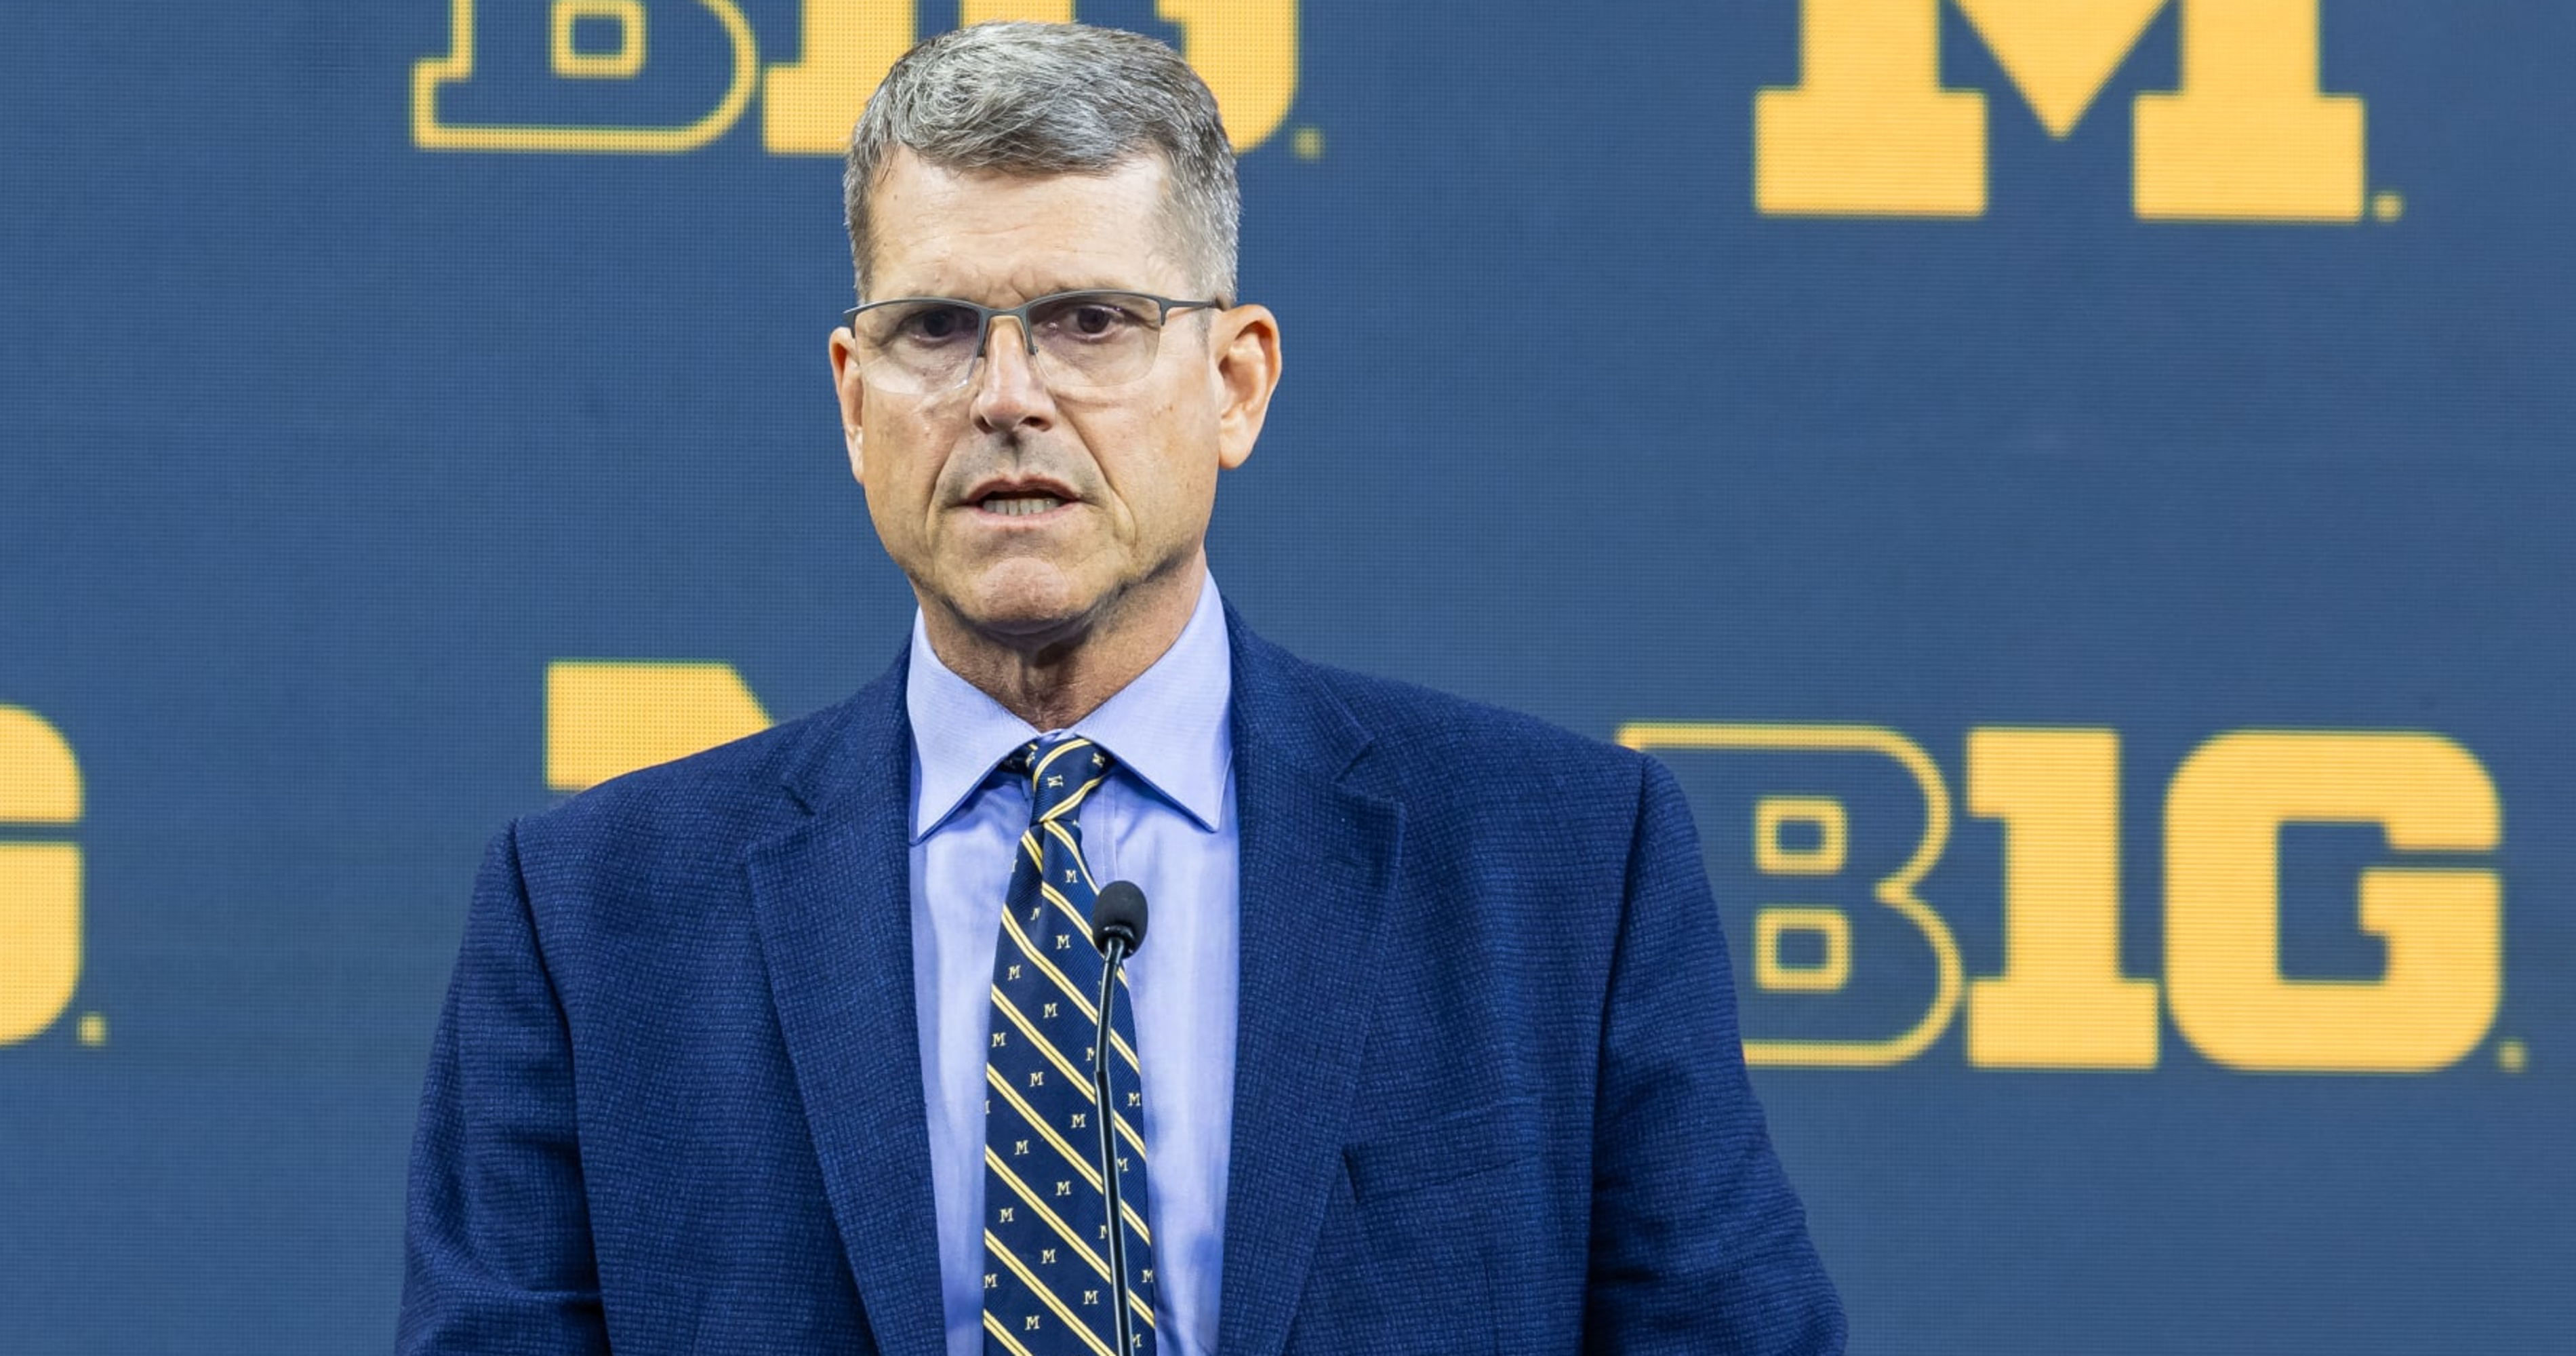 Jim Harbaugh Suspended 3 Games by Michigan Amid NCAA Investigation thumbnail